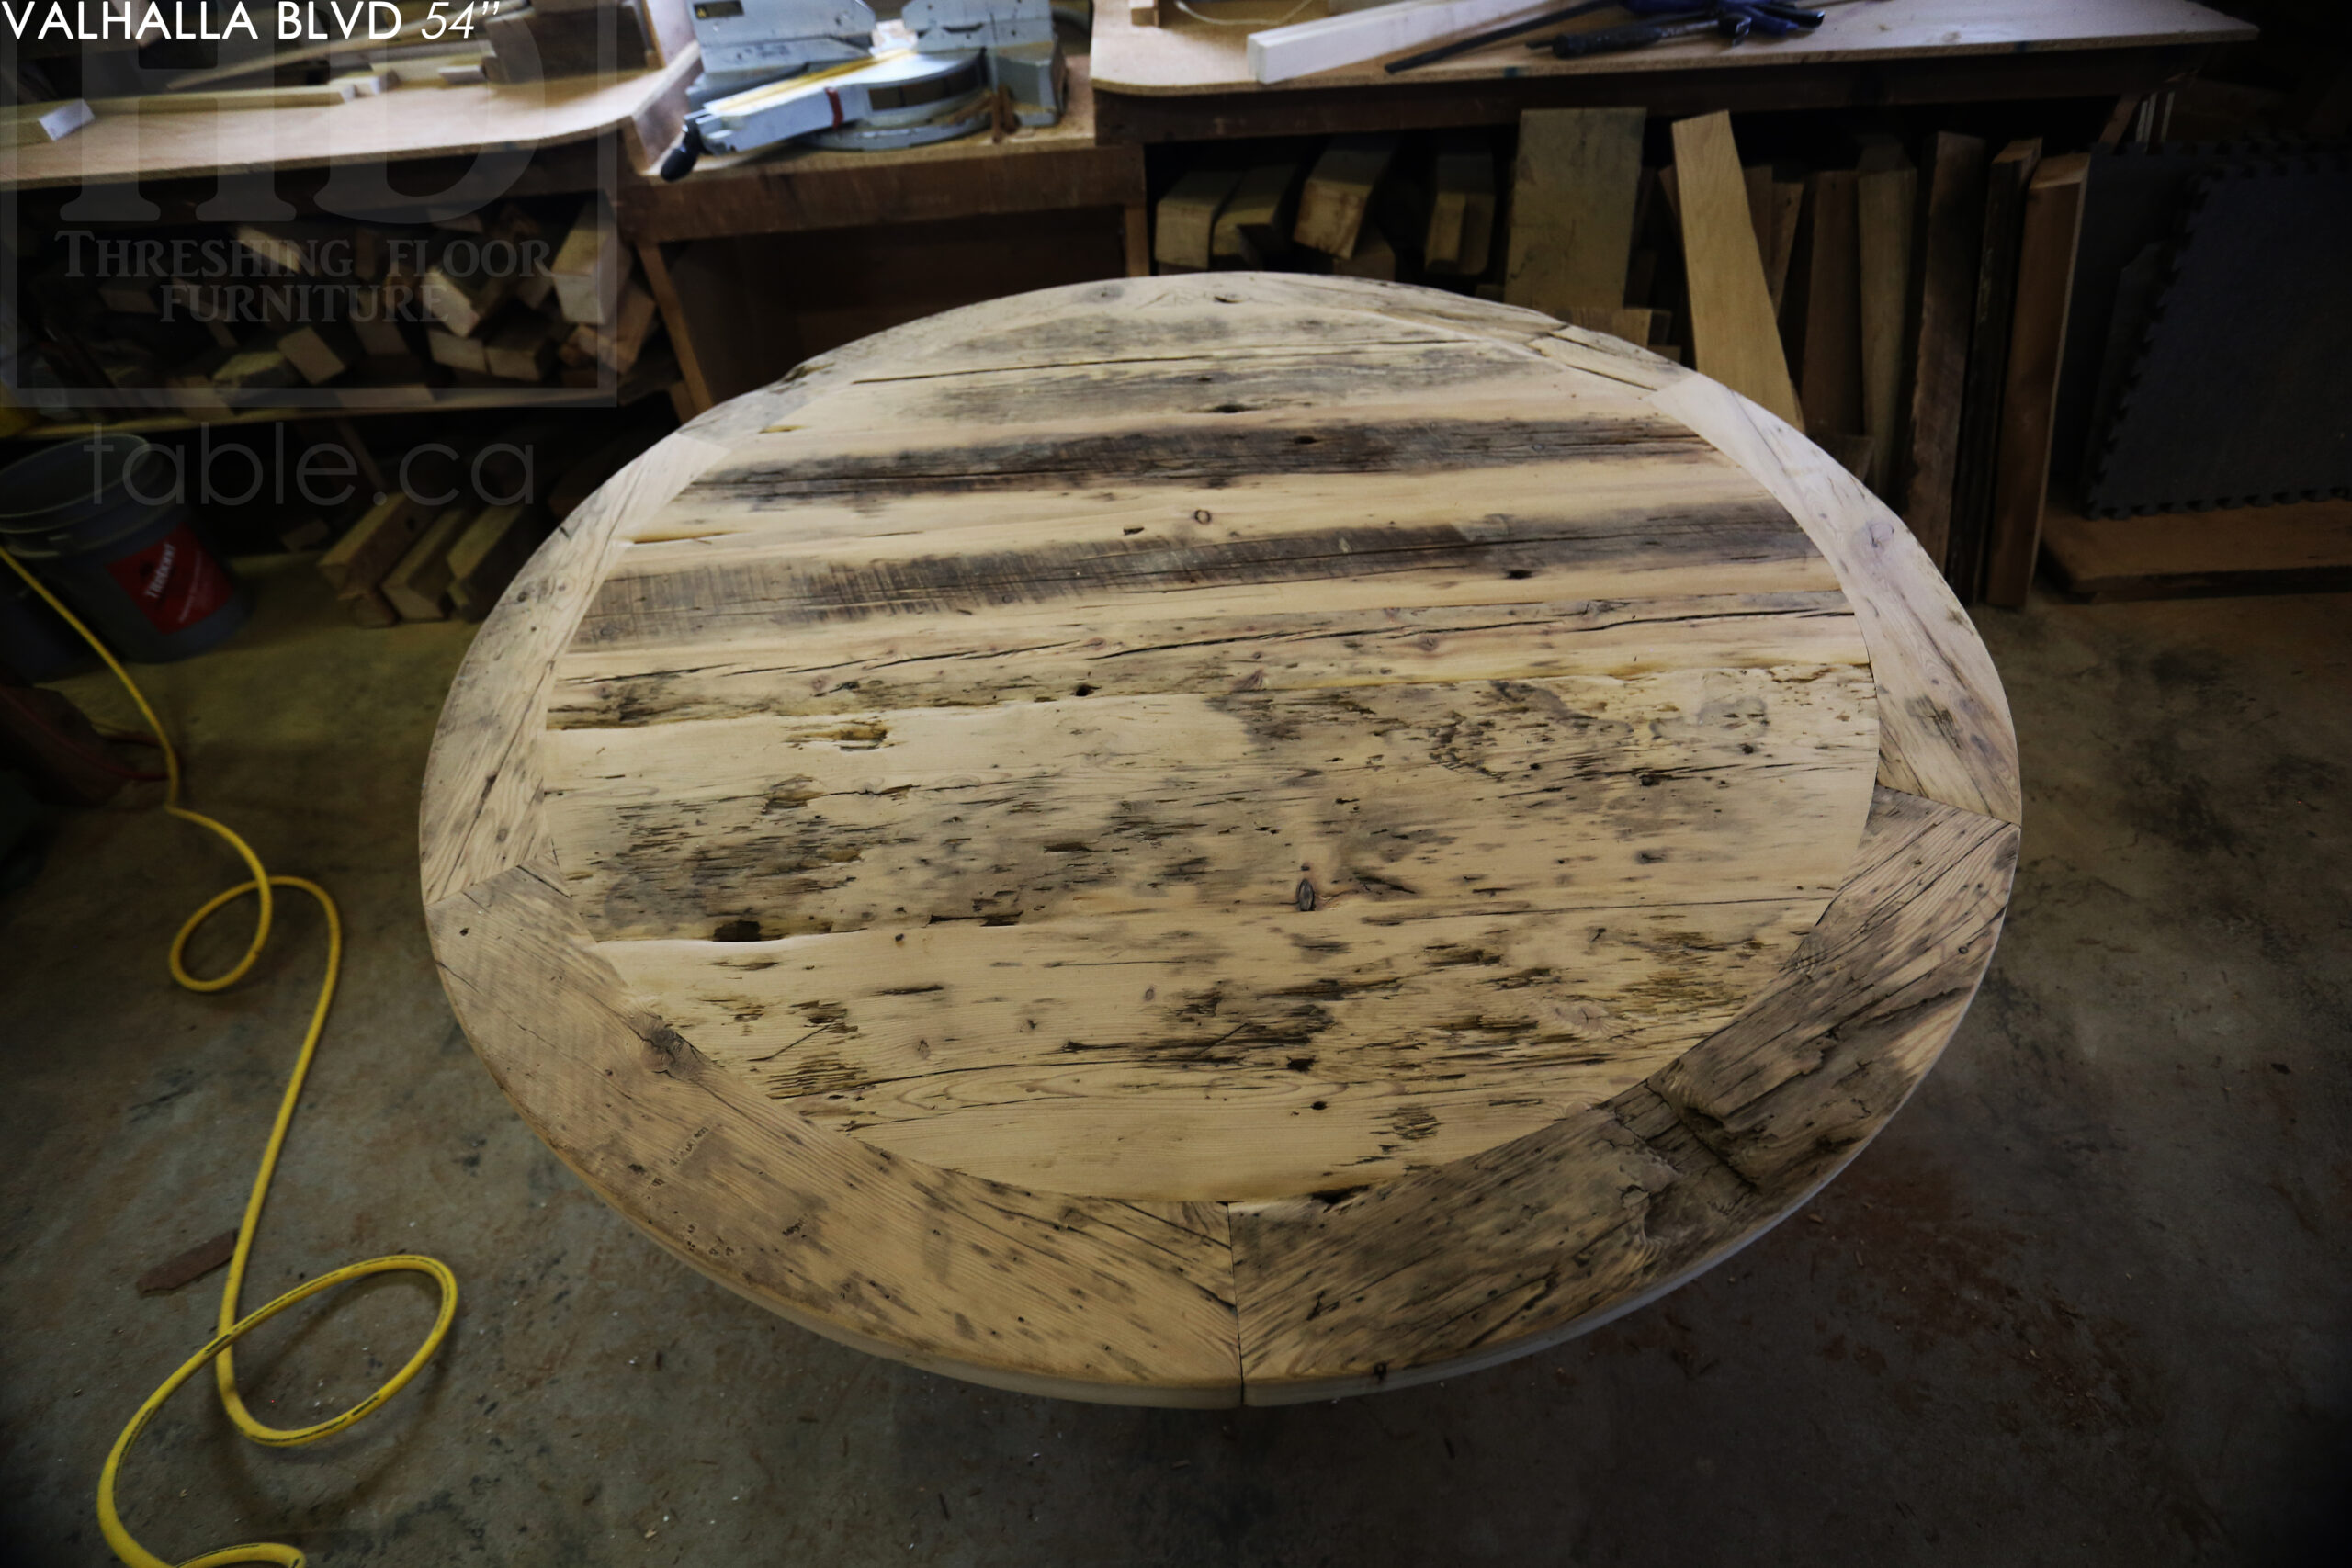 54" Ontario Barnwood Round Table we made for a Scarborough, Ontario home - Hand-Hewn Beam Pedestal Base - 2" Hemlock Threshing Floor Construction top - Greytone Option to maintain the colour of unfinished - Original edges & distressing maintained - Premium epoxy + matte polyurethane finish - www.table.ca